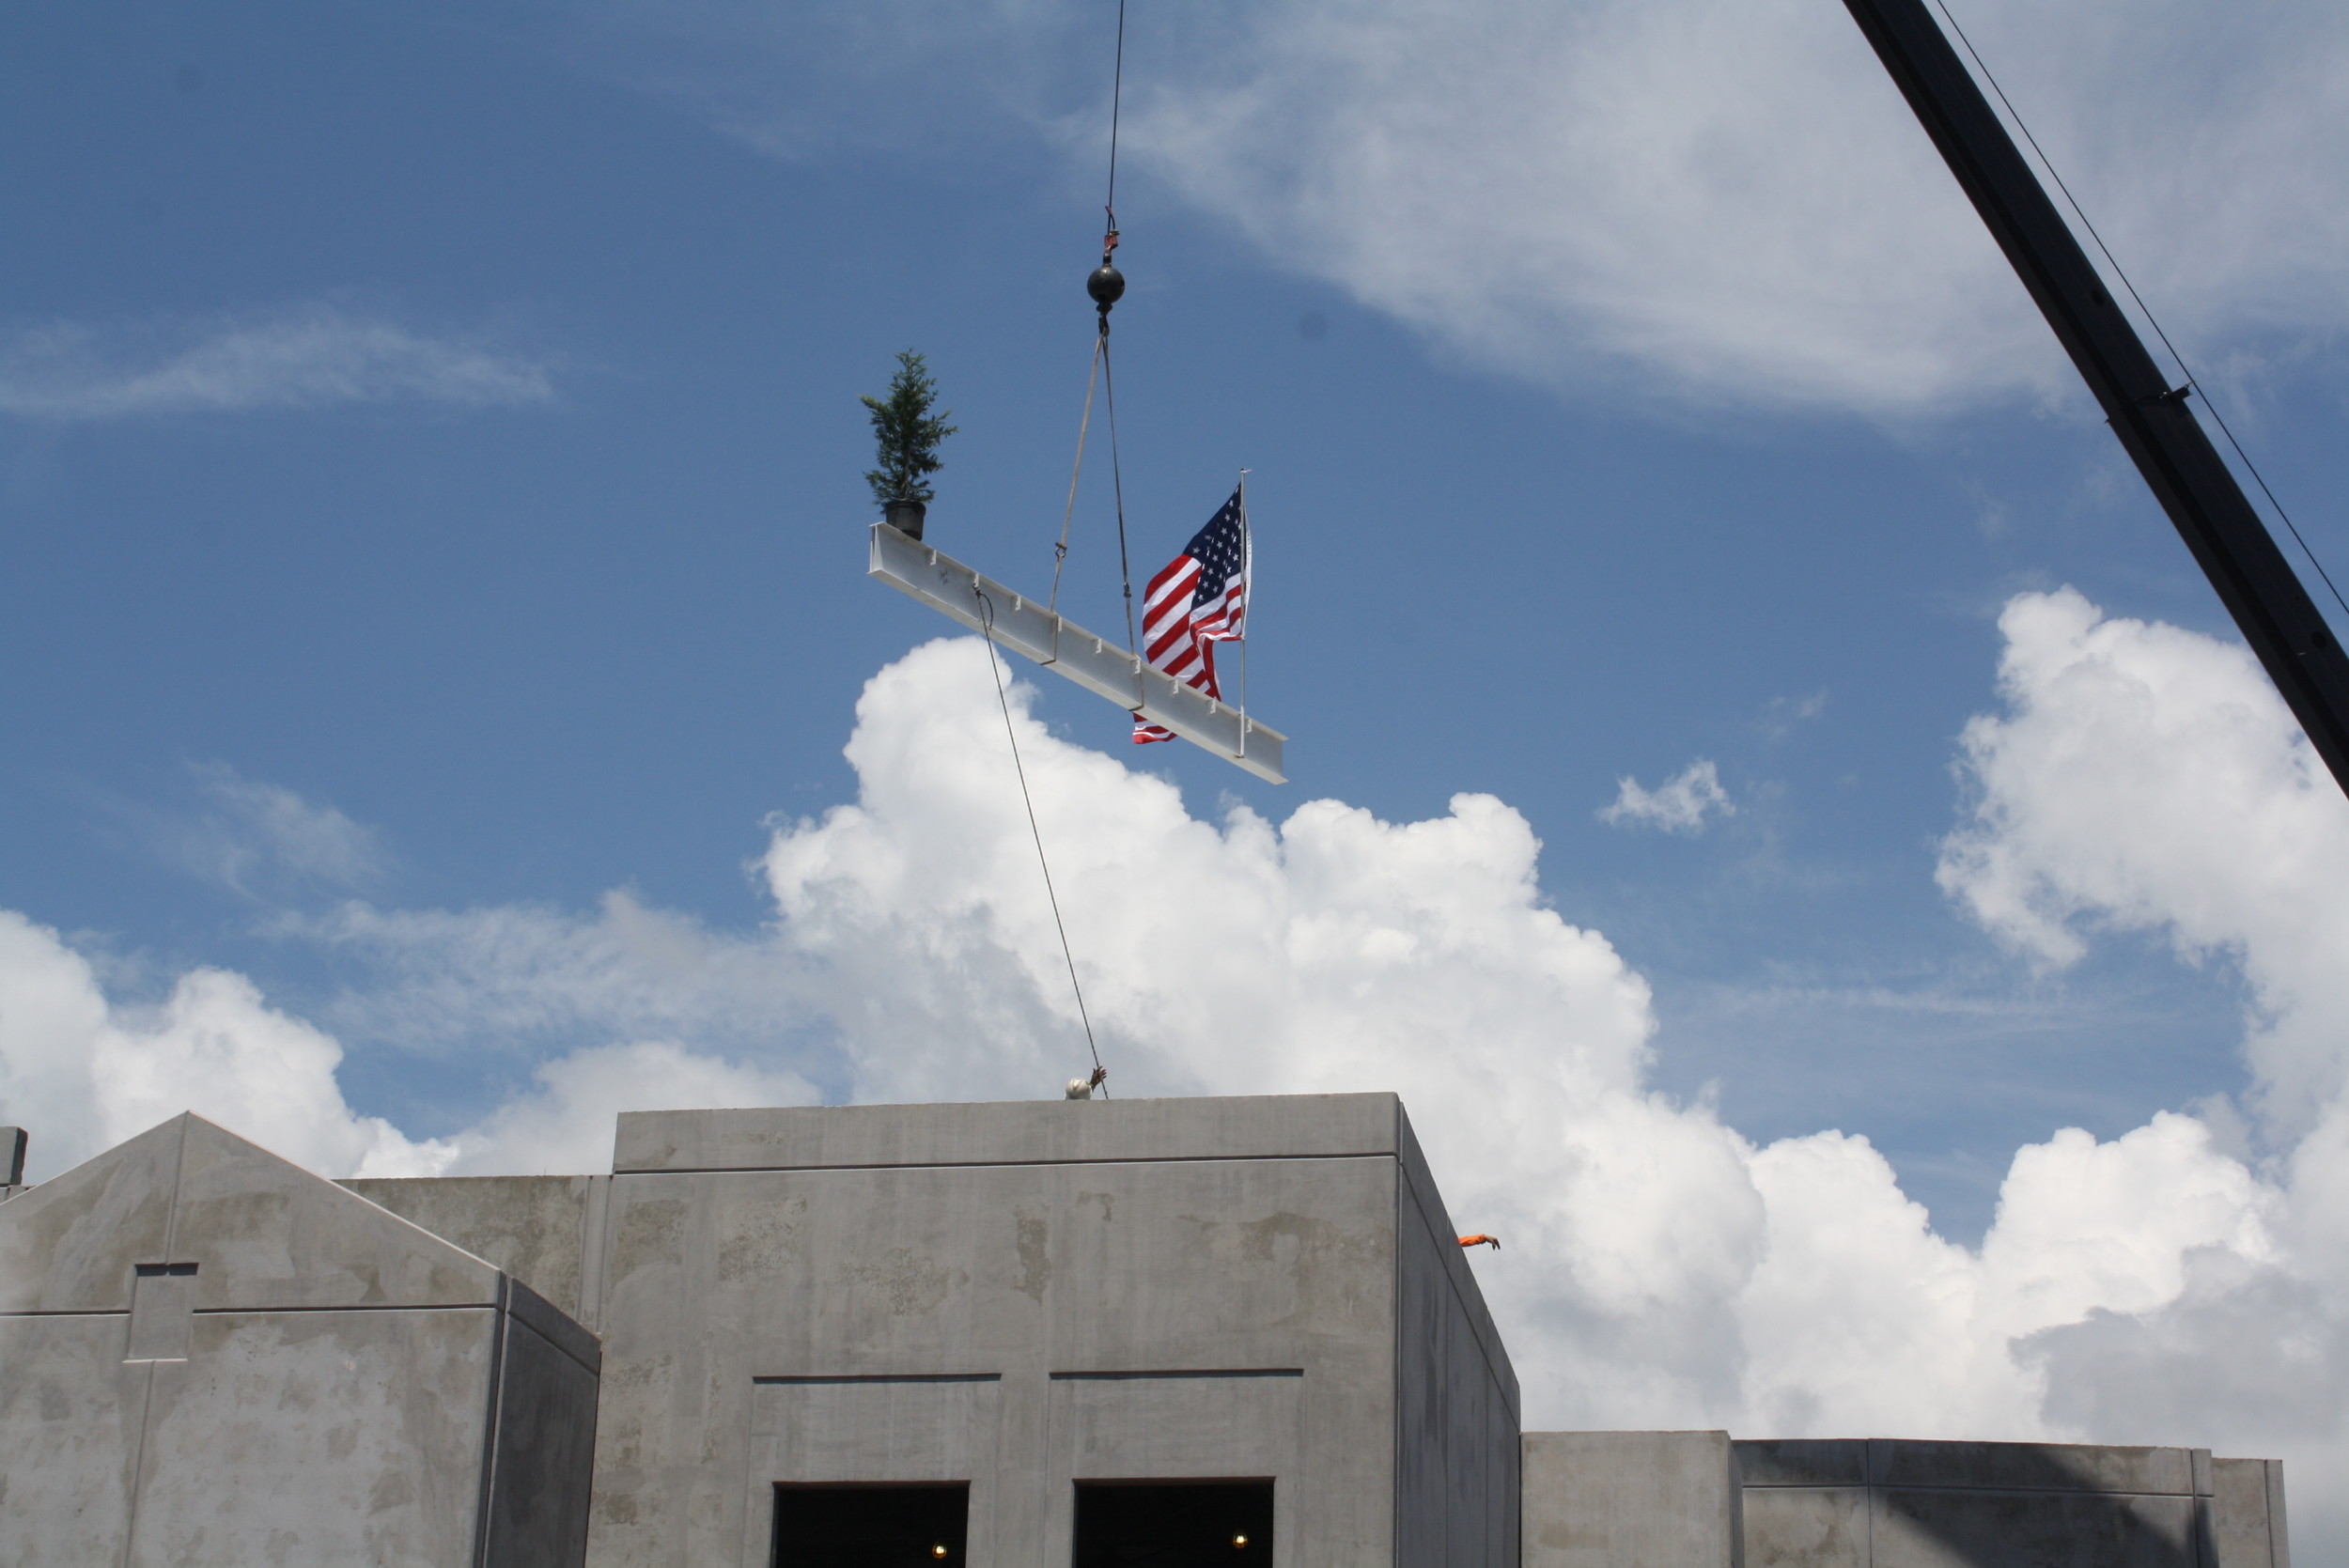 A crane lifts the final steel beam atop the new K-8 school in Nocatee at a “topping out” ceremony held last week.